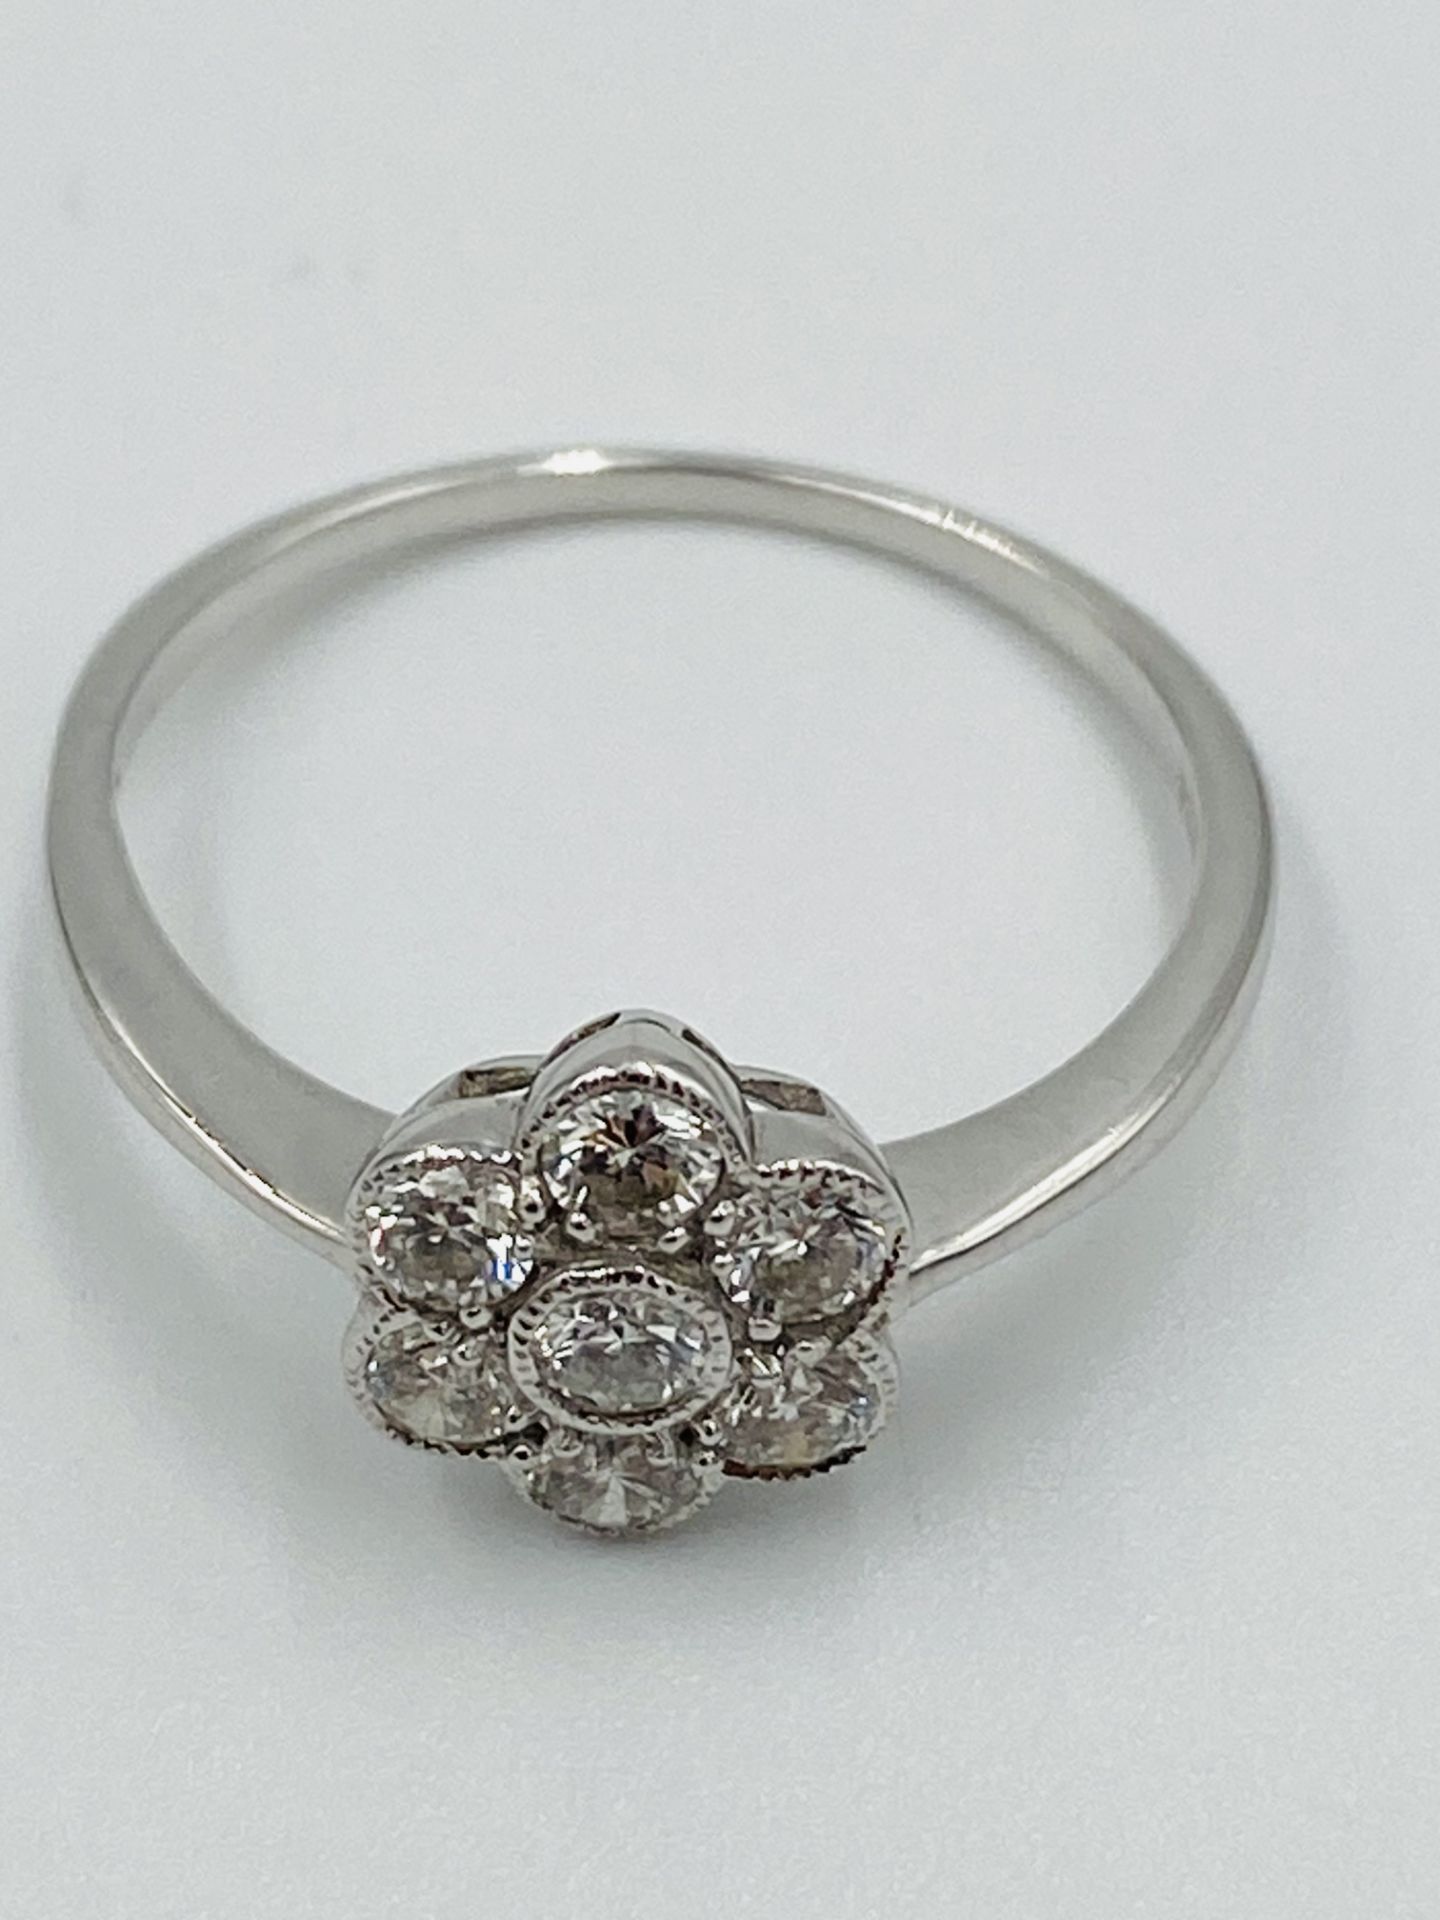 18ct white gold and diamond ring - Image 5 of 5